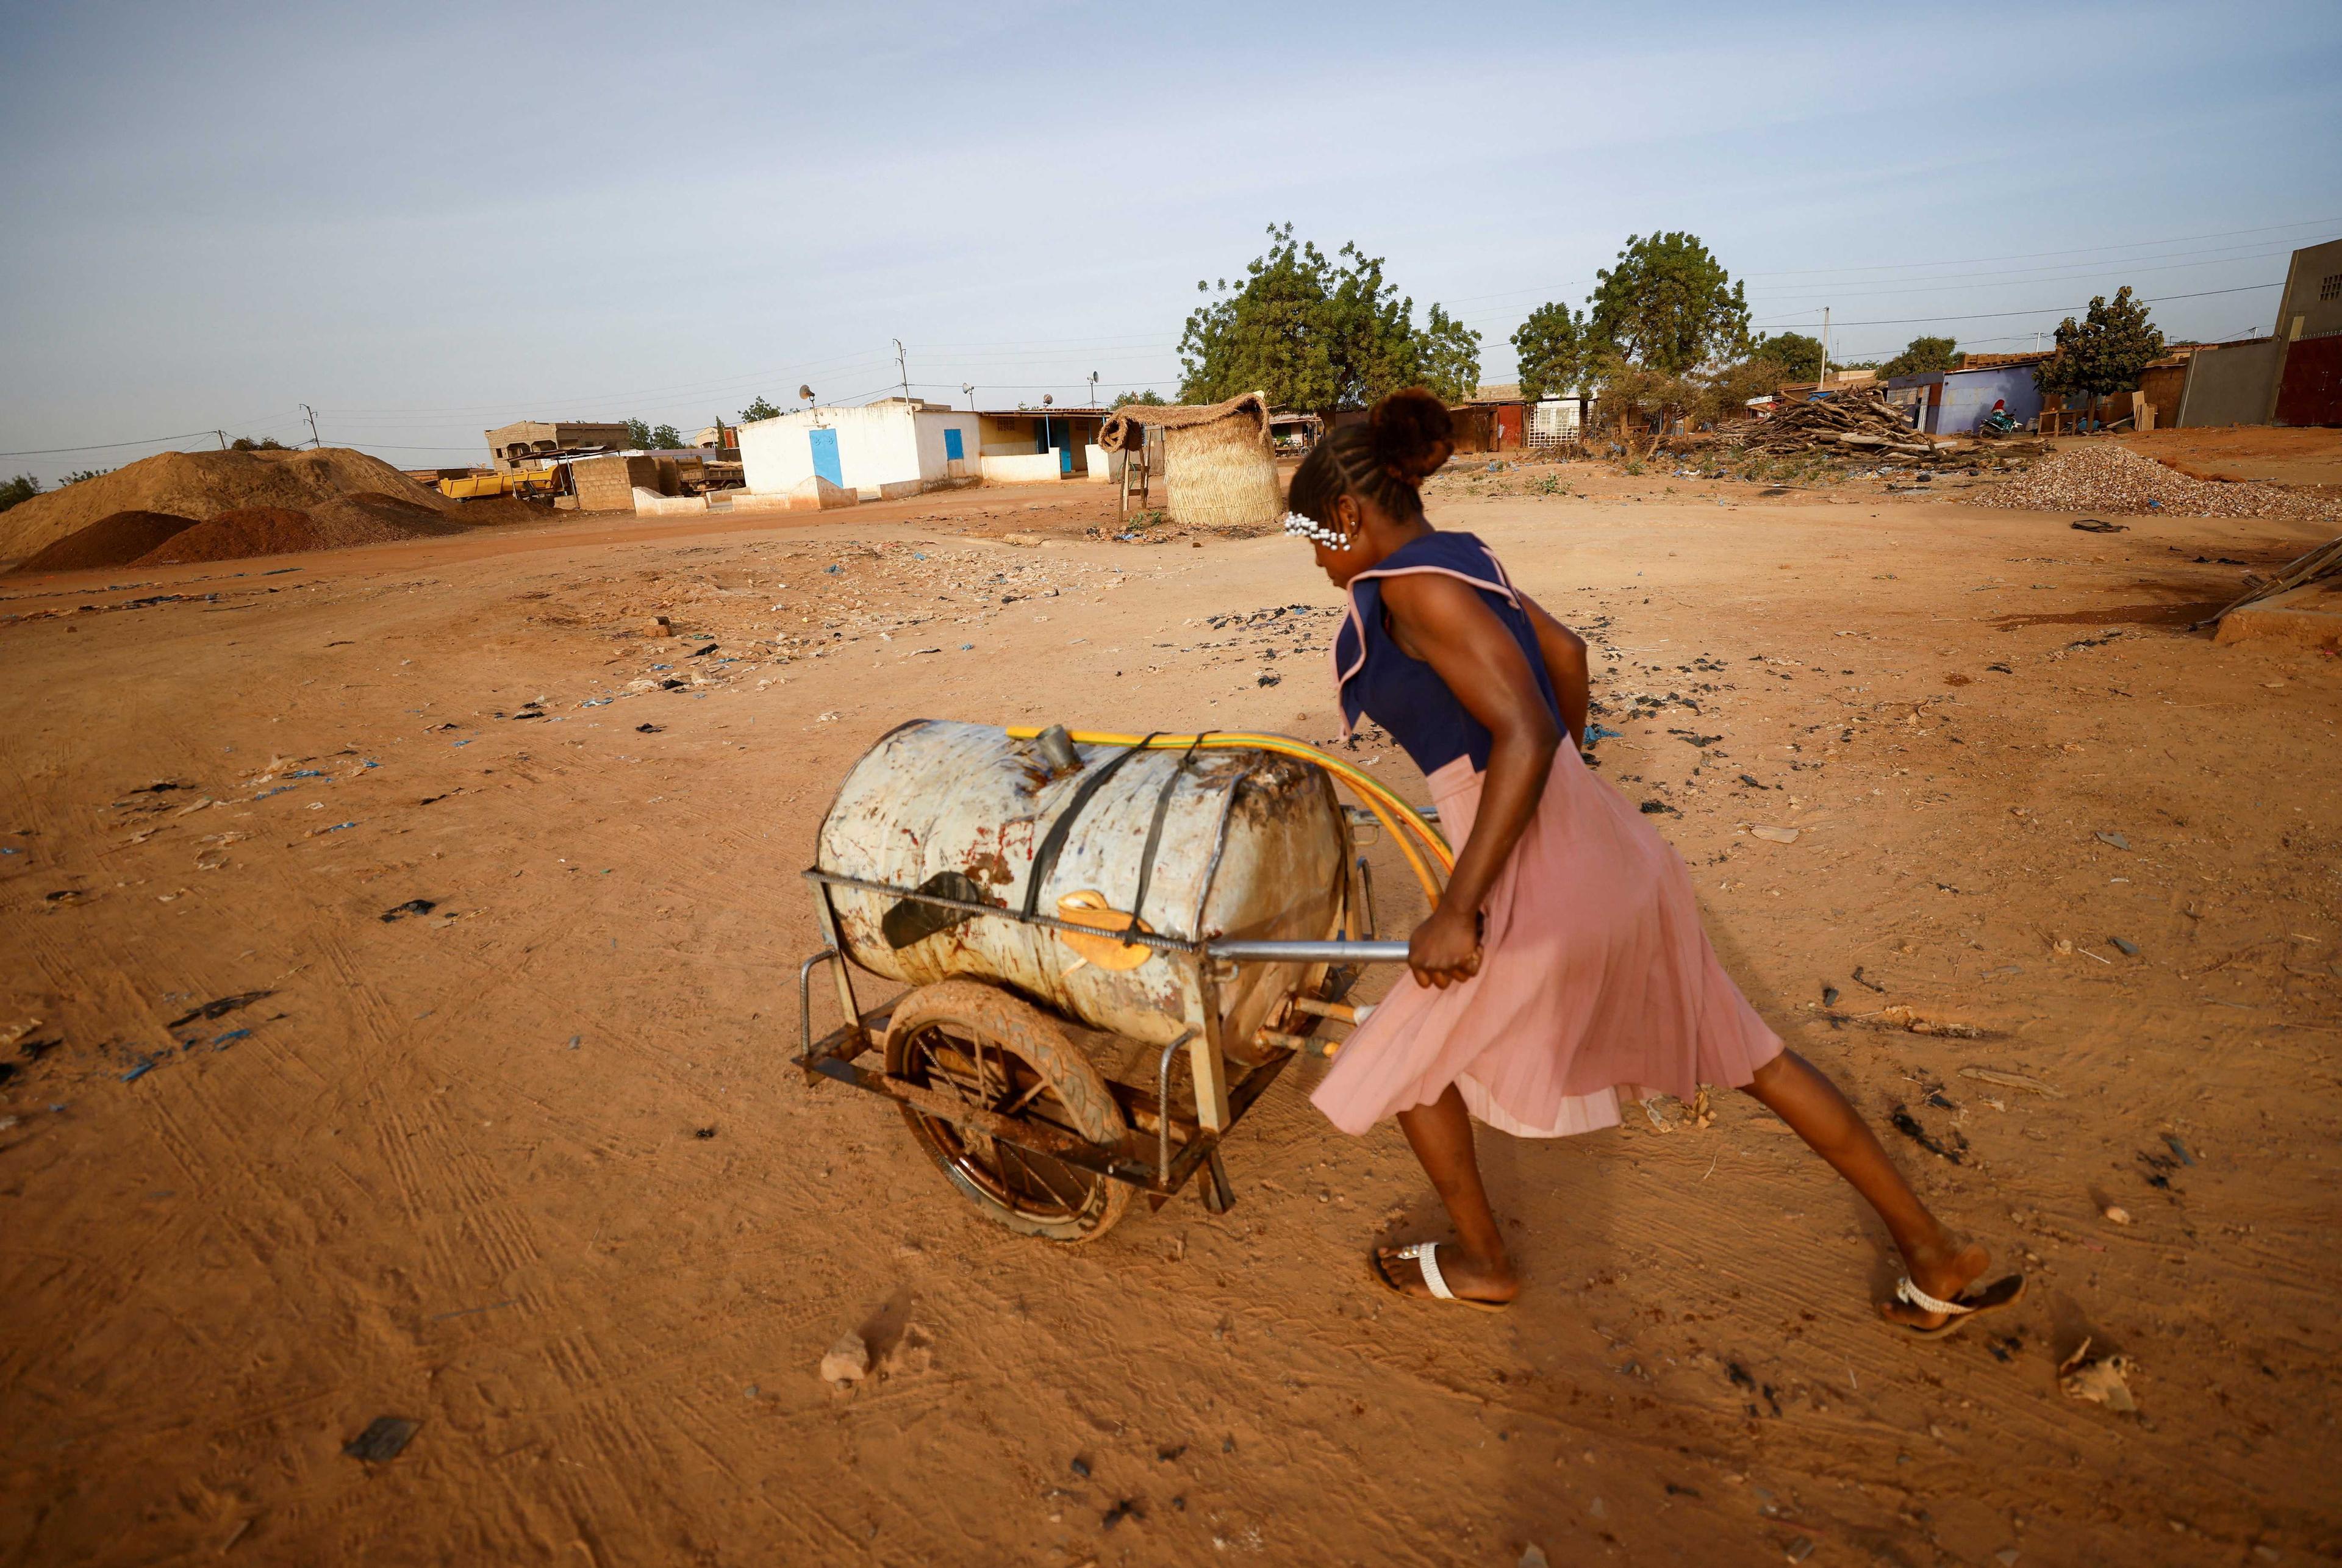 A woman pushes a barrel filled with water on the outskirts of Ouagadougou, Burkina Faso Jan 30, 2022. Photo: Reuters